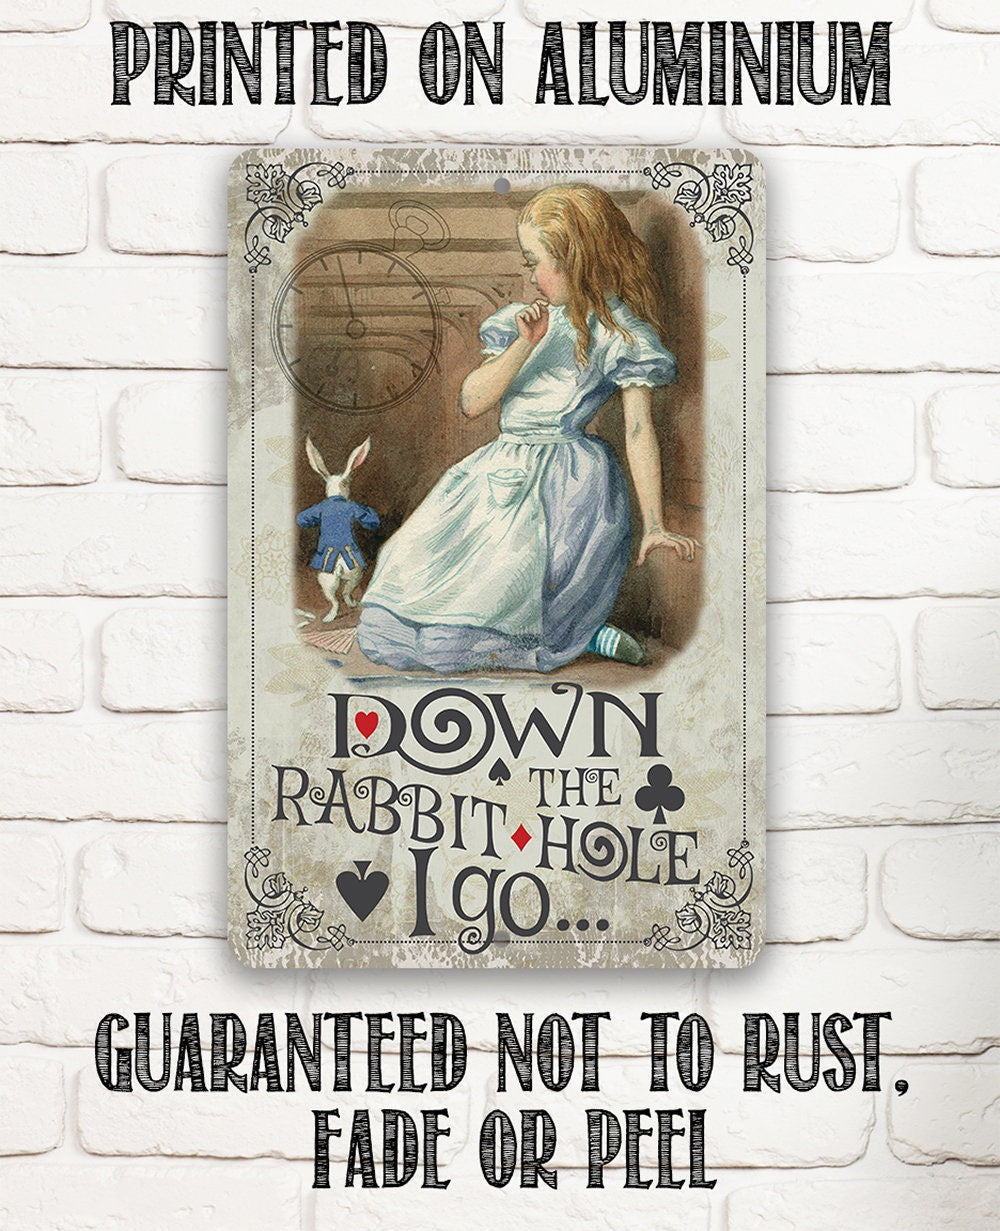 Down The Rabbit Hole I Go - Metal Sign Metal Sign Lone Star Art 